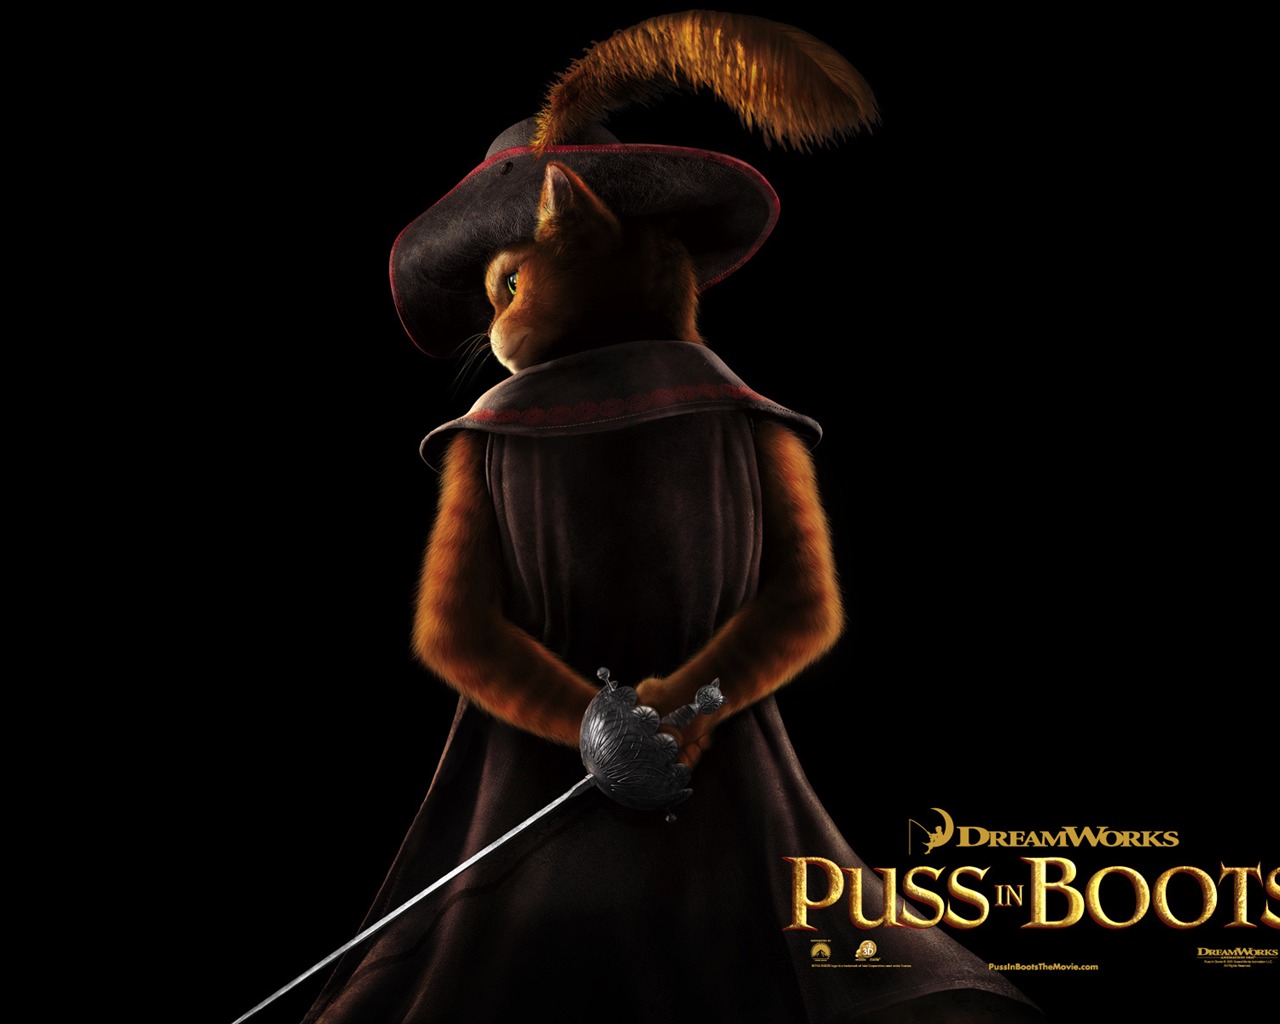 Puss in Boots HD wallpapers #2 - 1280x1024